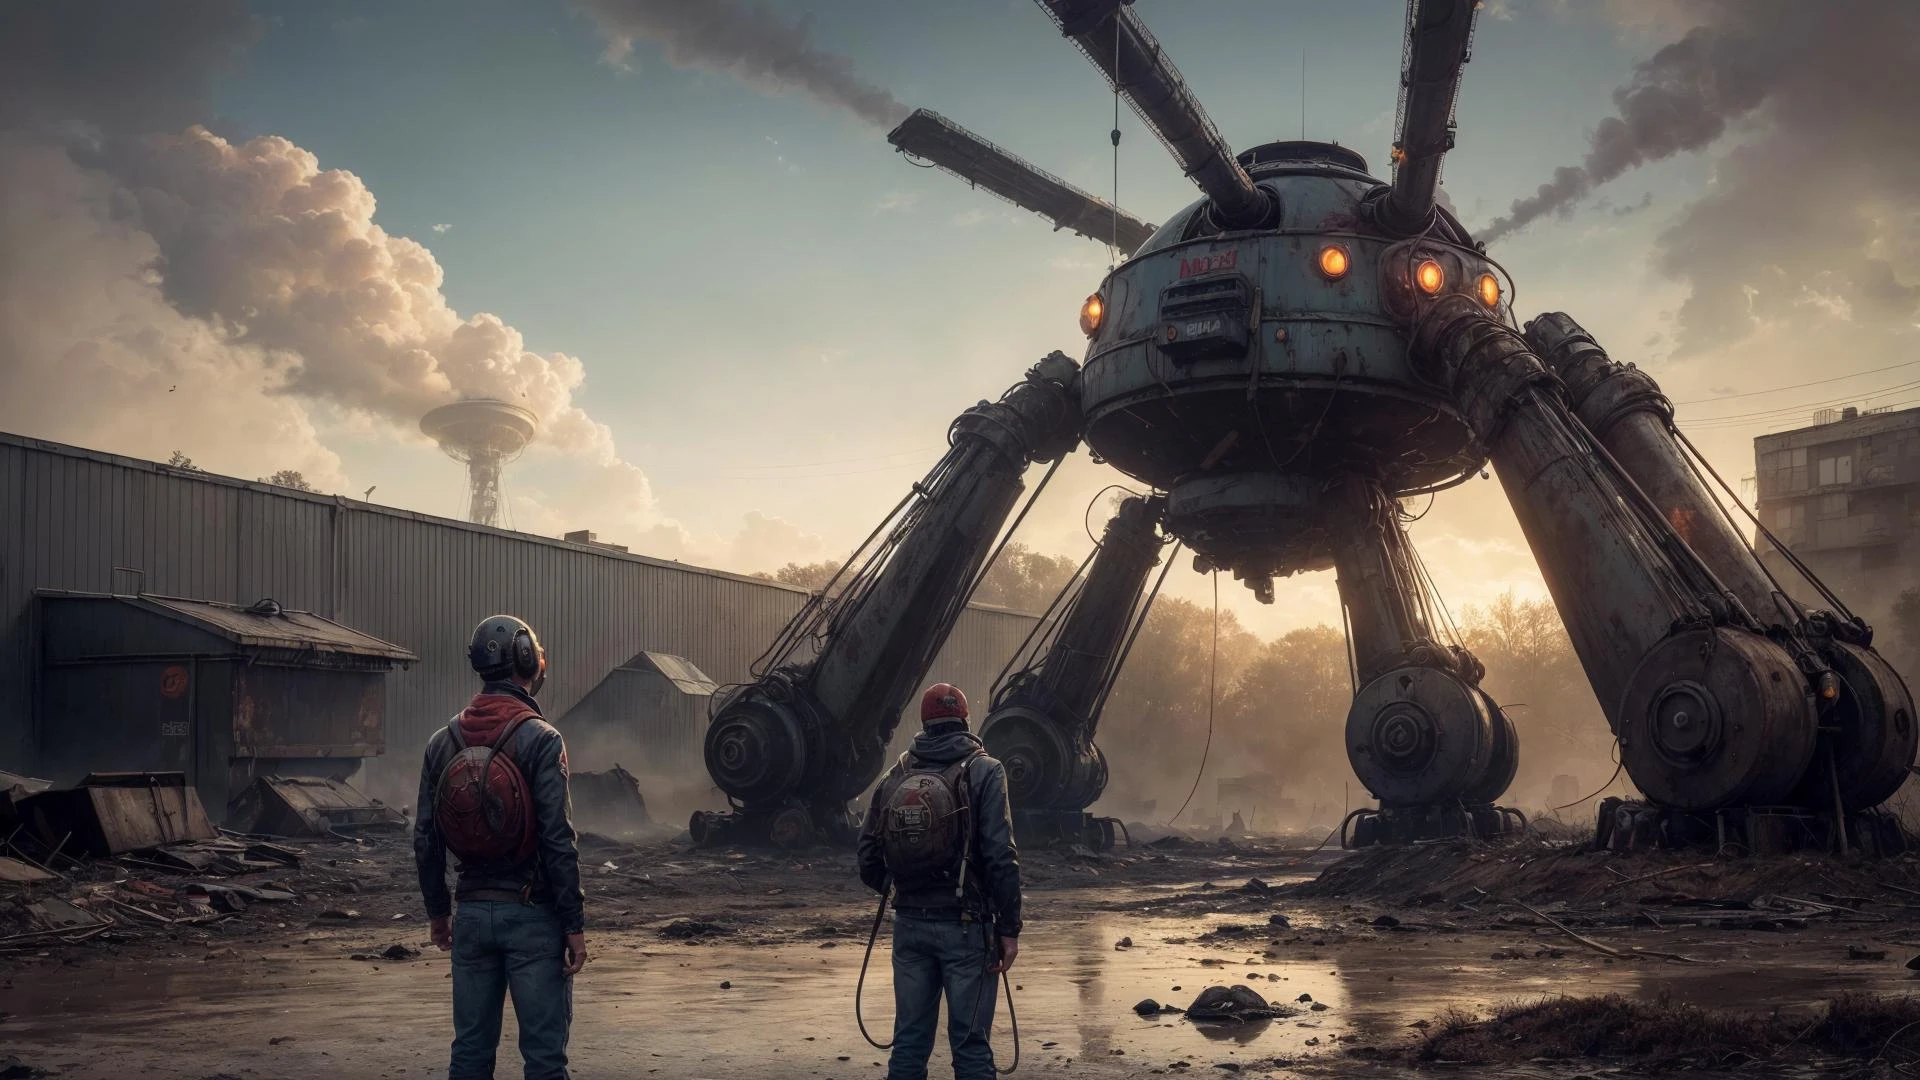 (style of Simon Stalenhag:1.3), painting of (huge large:1.3) (metal:1.3) spider, in apocalypse, realistic, COVER ART, 